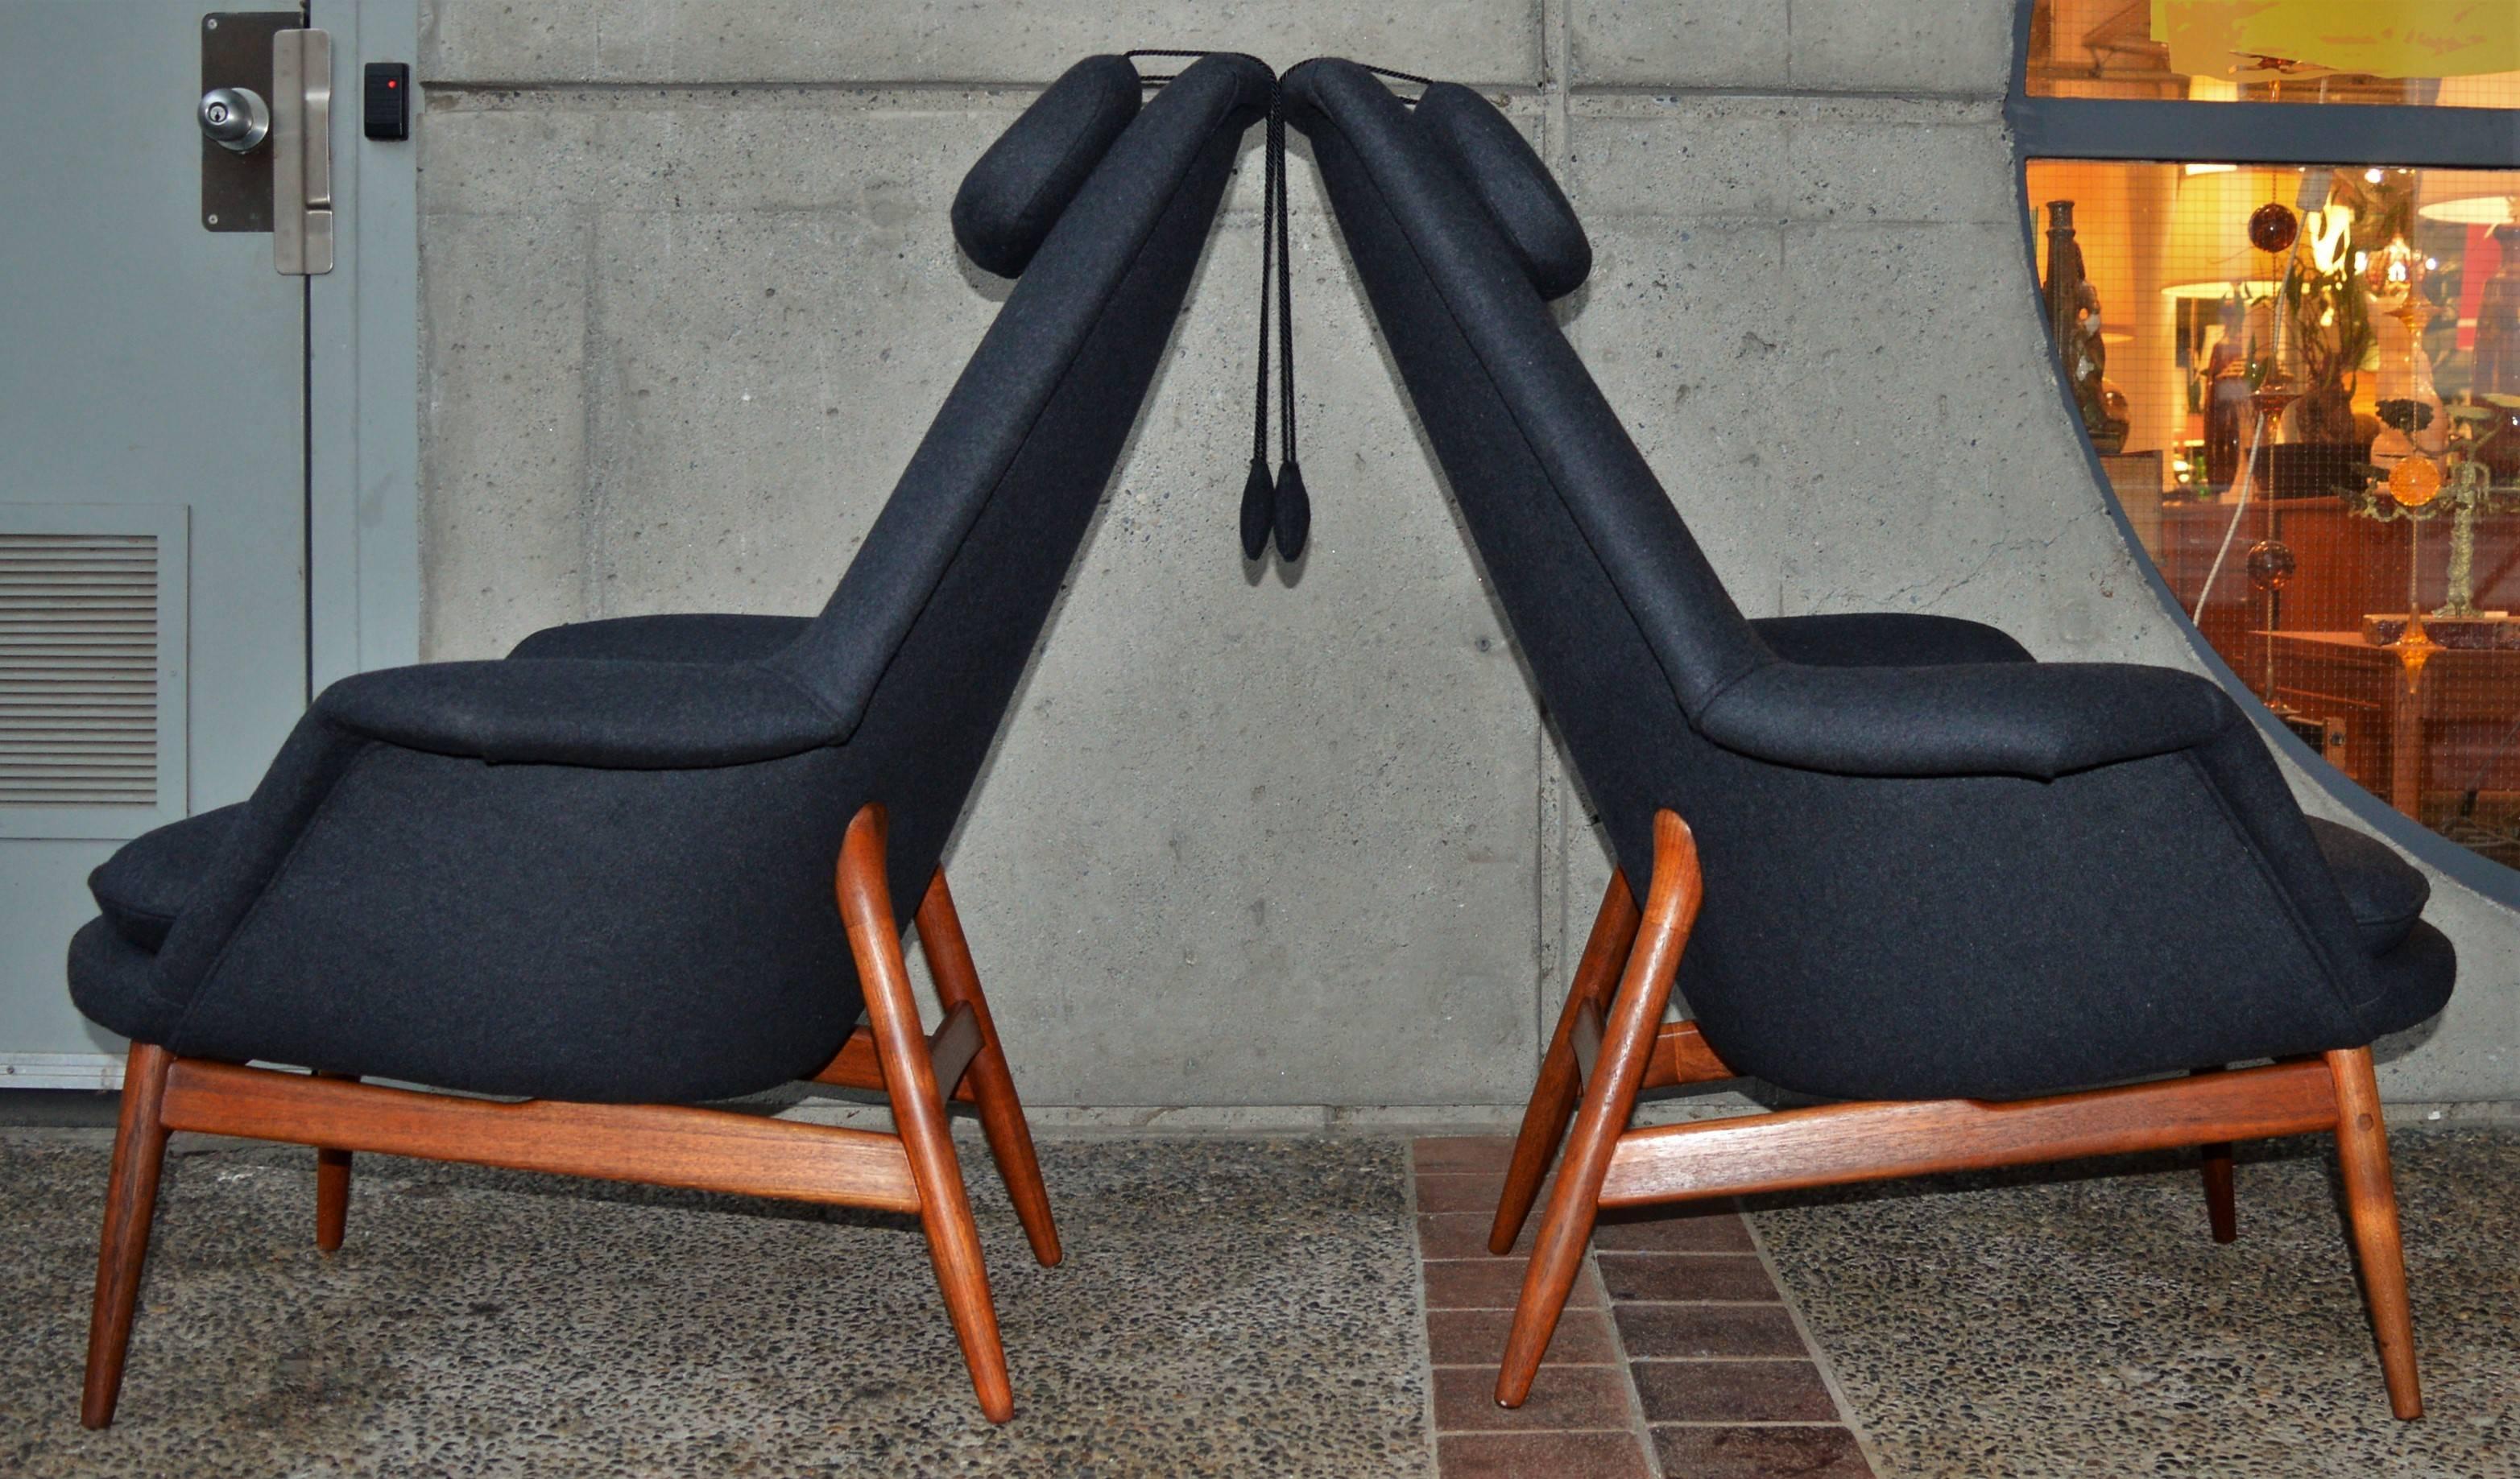 Upholstery Pair of Teak Manta Ray Chairs in Charcoal Wool by Bjorn Engo for DUX